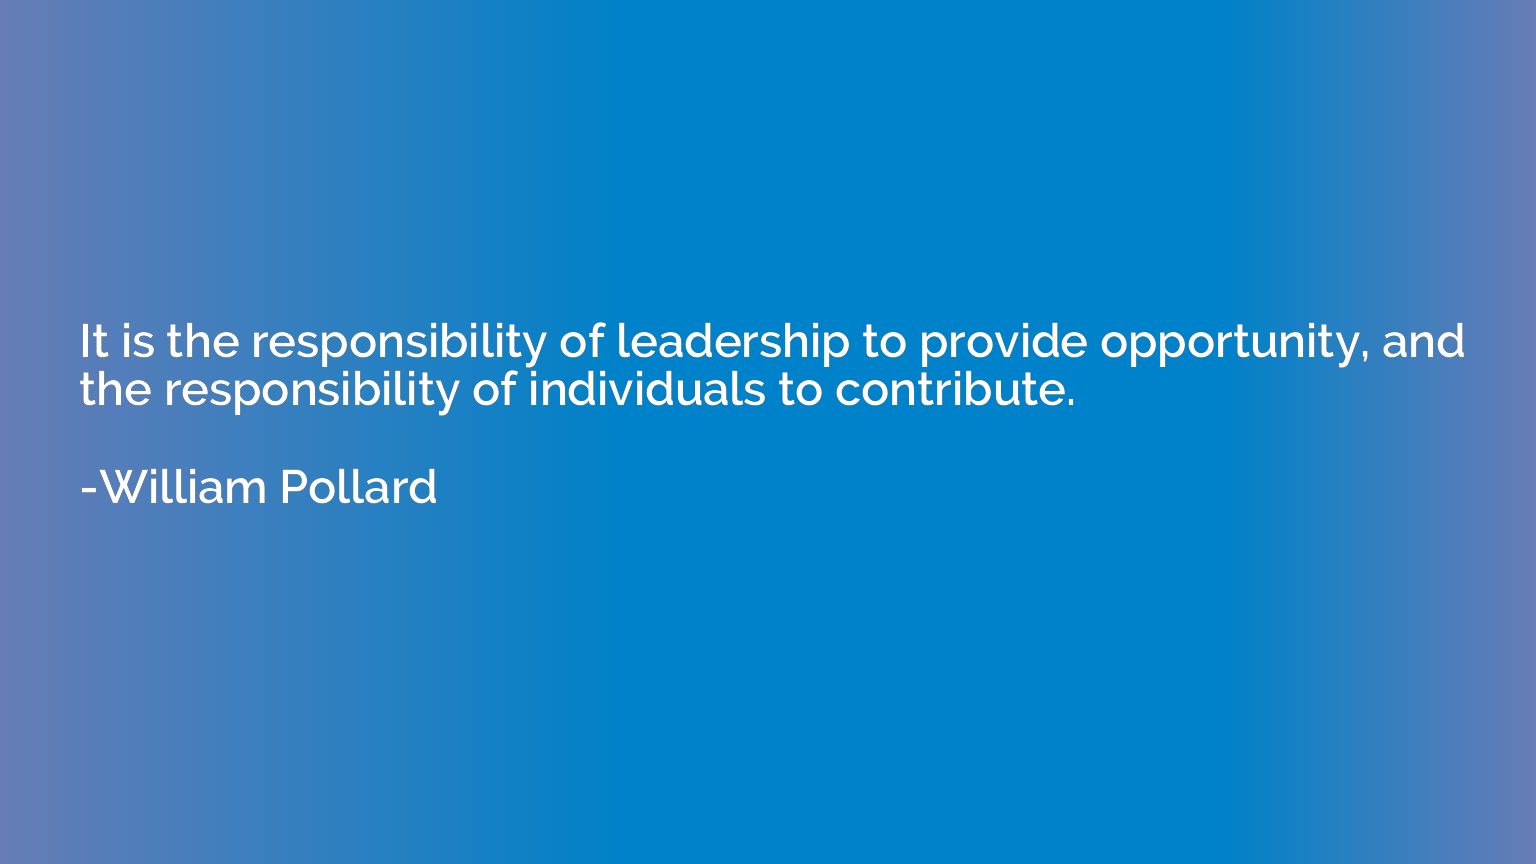 It is the responsibility of leadership to provide opportunit